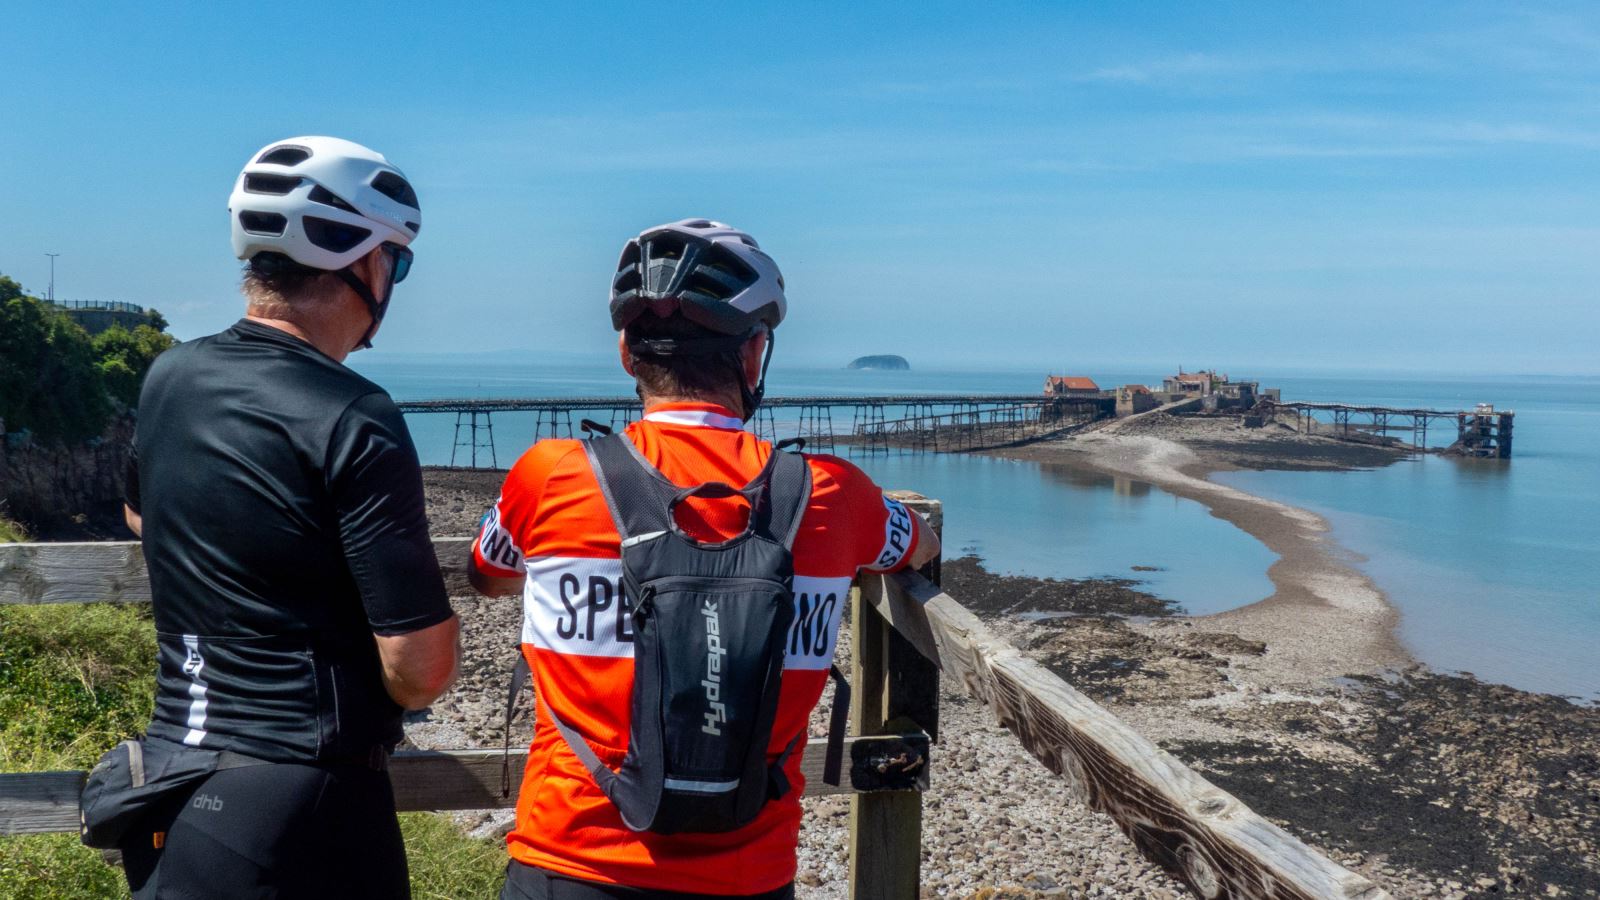 Two cyclists leaning on a fence admiring a sea view